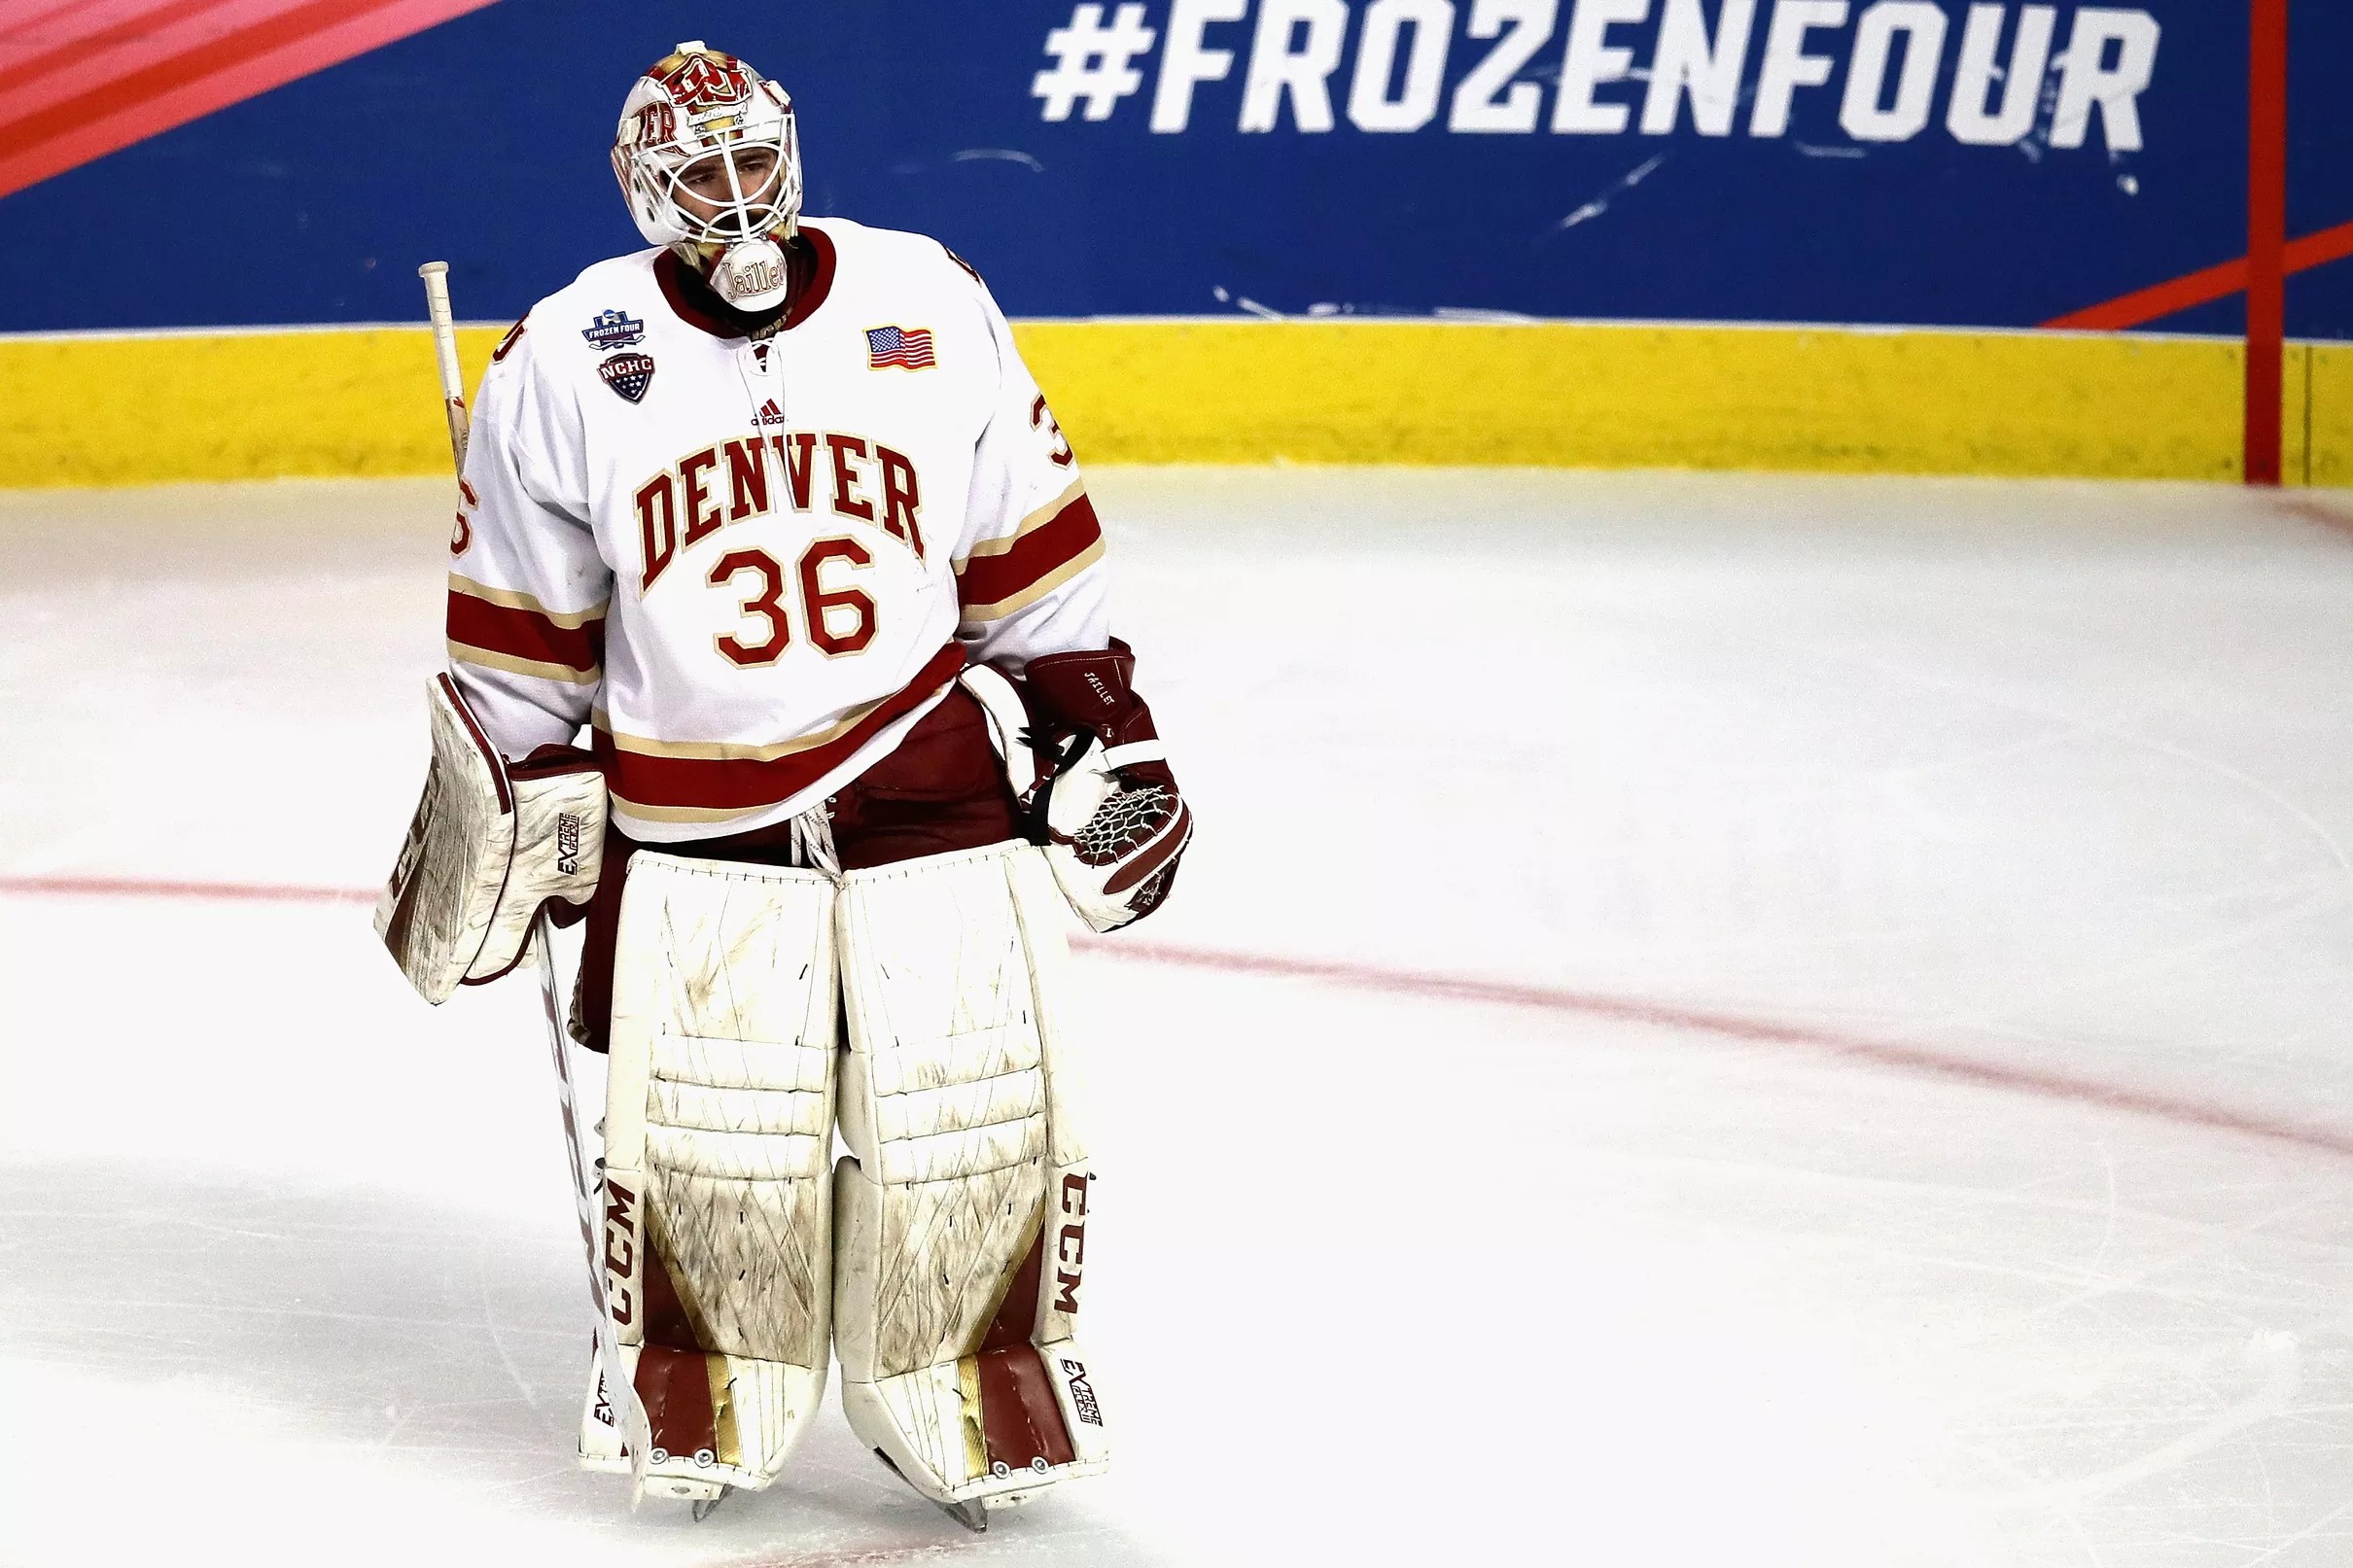 NCAA hockey tournament DU Pioneers come up short in loss to Ohio State